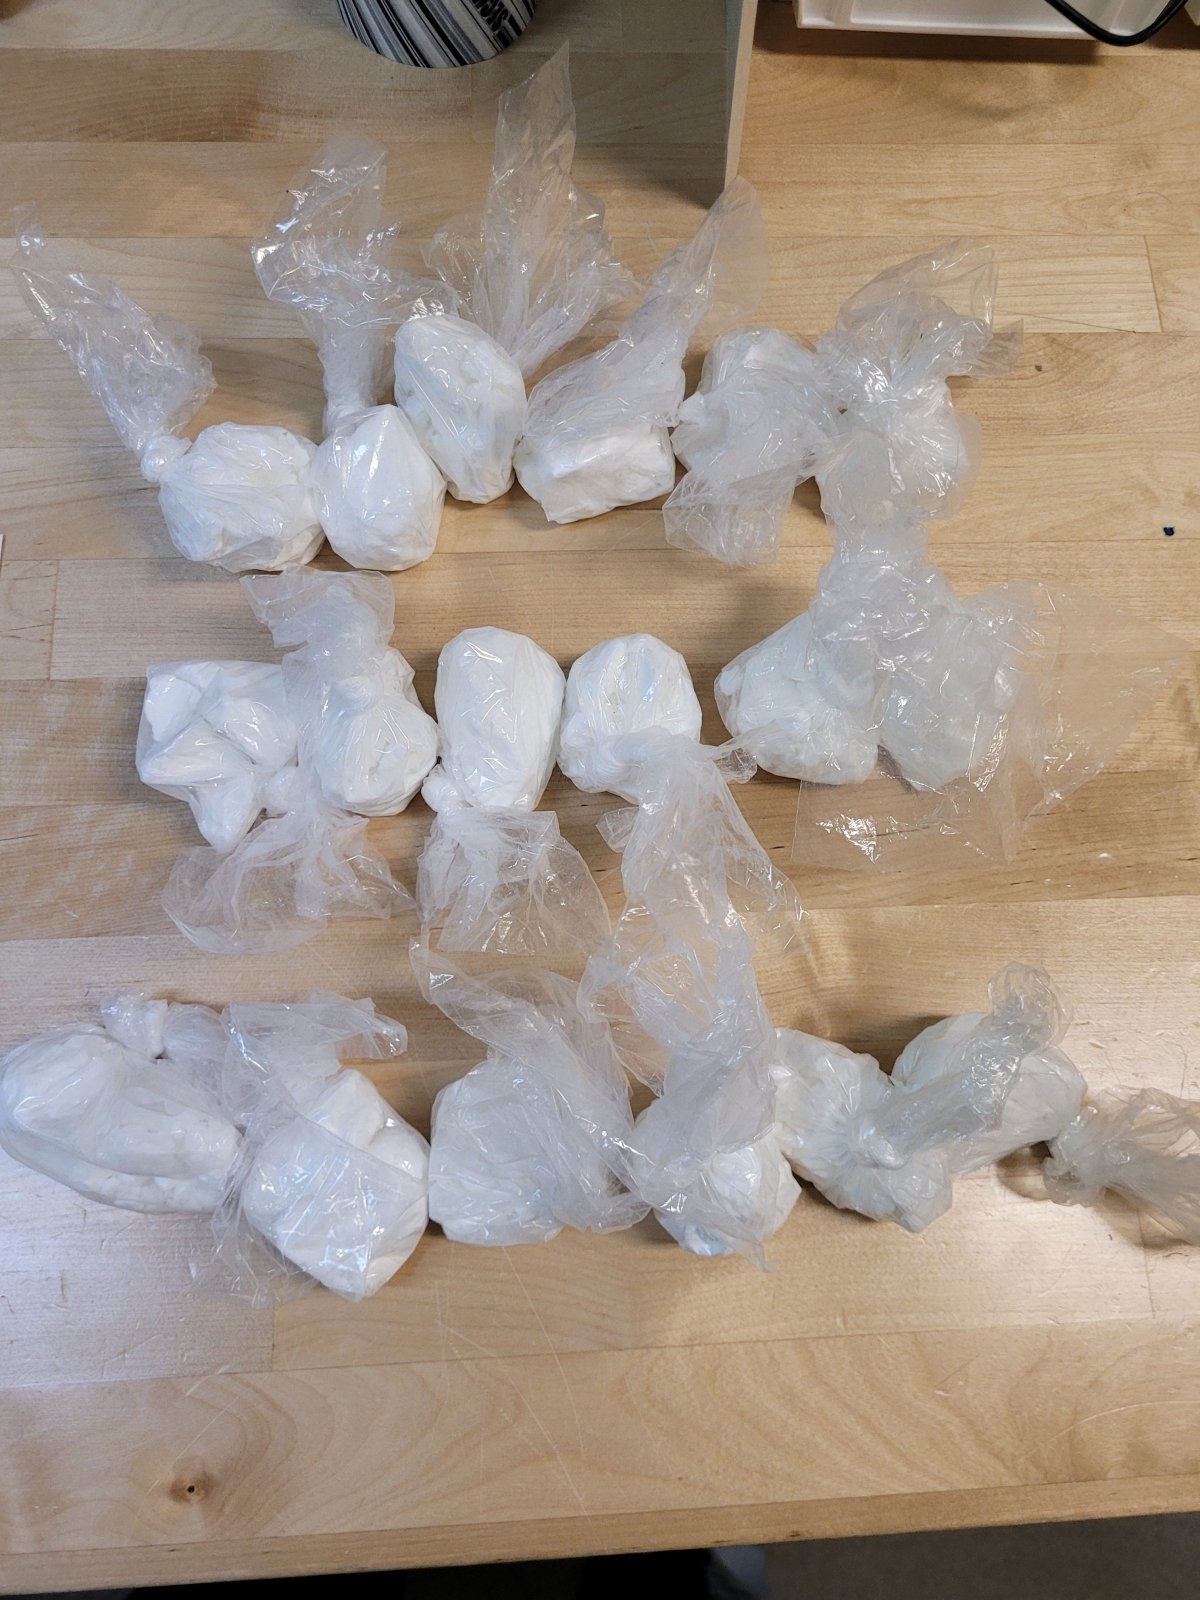 Thompson RCMP are investigating after a traffic stop outside the city on Nov. 1 led to the arrests of four individuals and the seizure of thousands of dollars worth of cocaine.